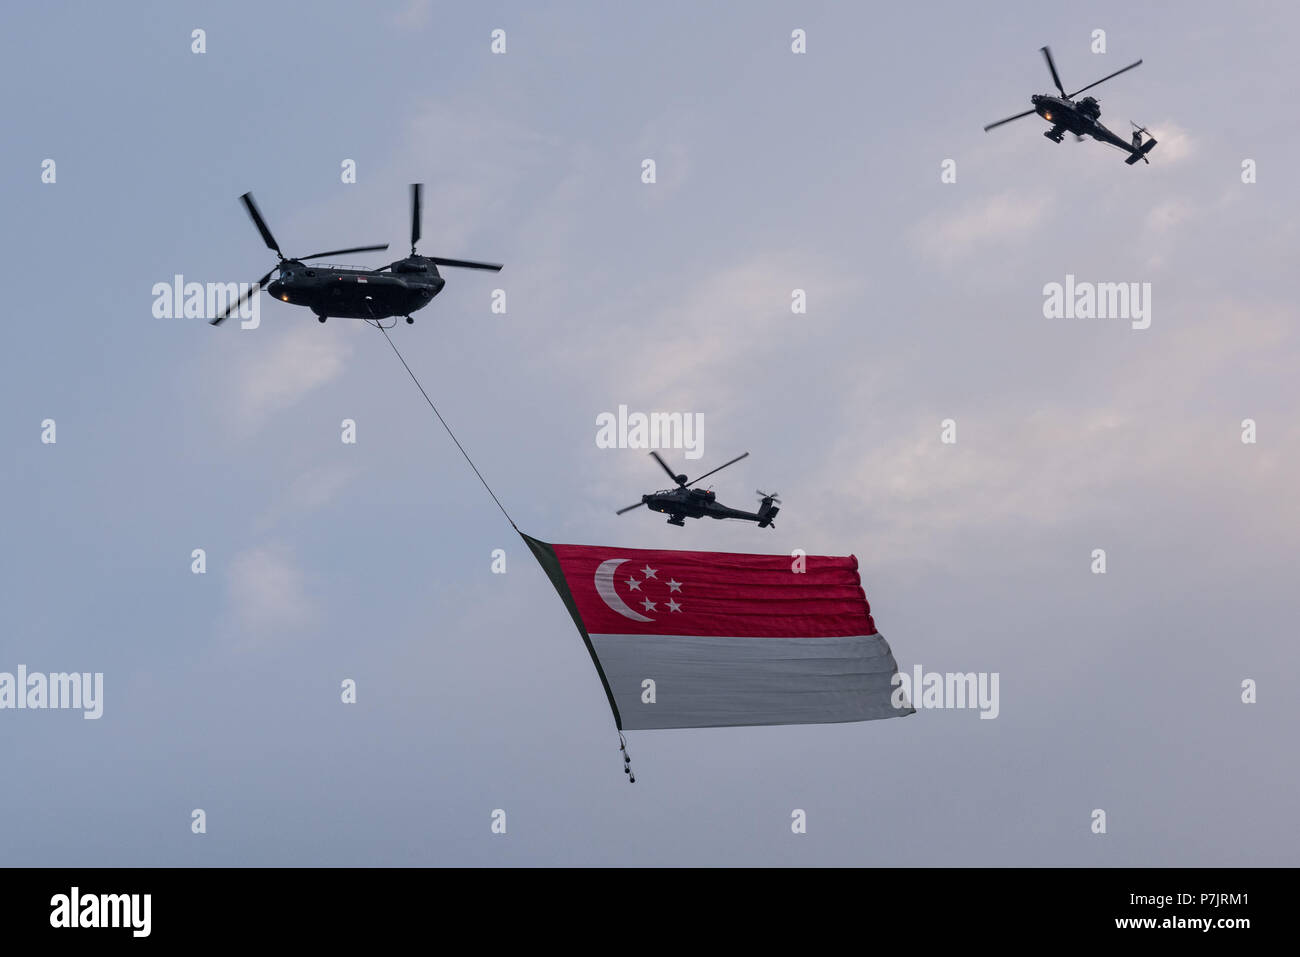 Full rehearsal, National Day celebrations, anniversary of Singapore's independence on August 9, army helicopters displaying national colours above Marina Sands Bay Stock Photo